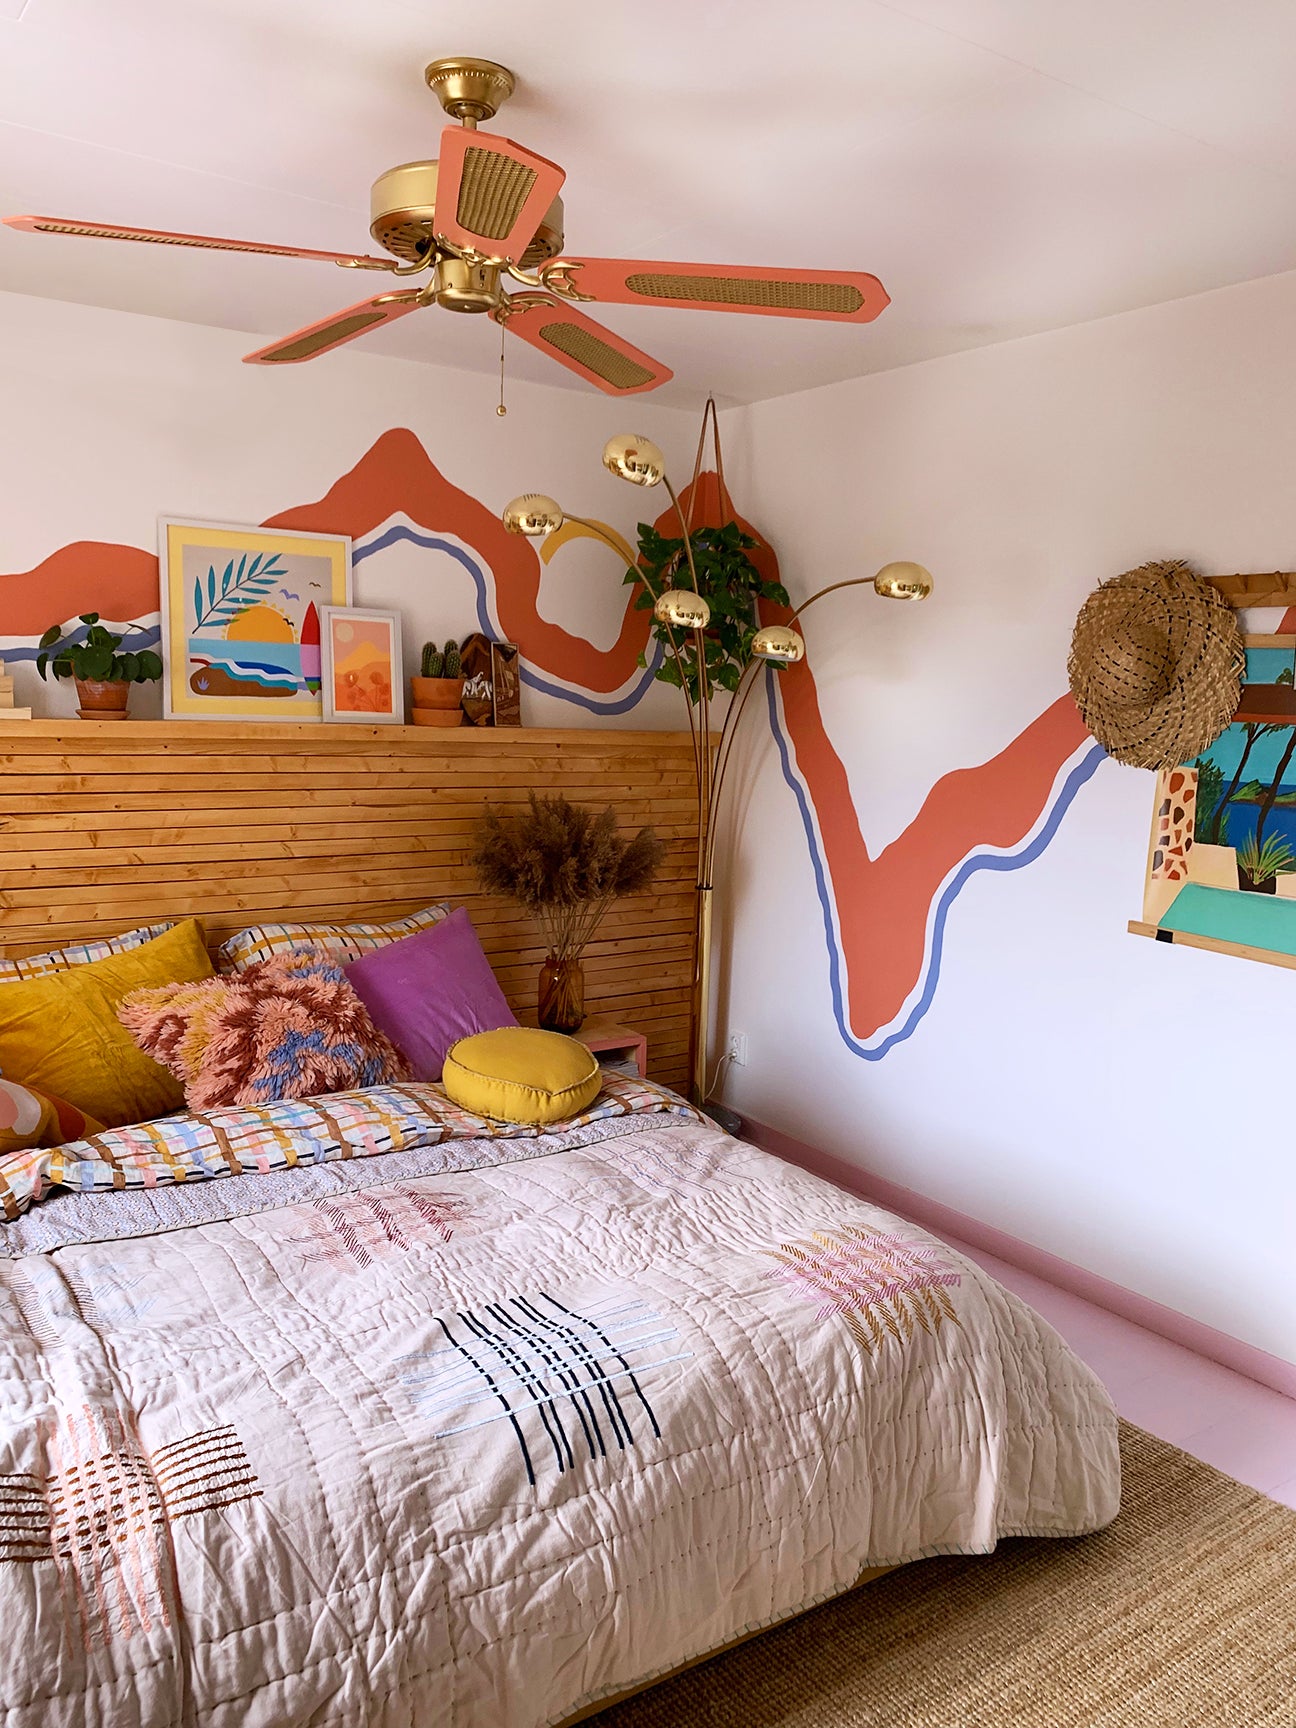 pink-ceiling-fan-colorful-bedroom